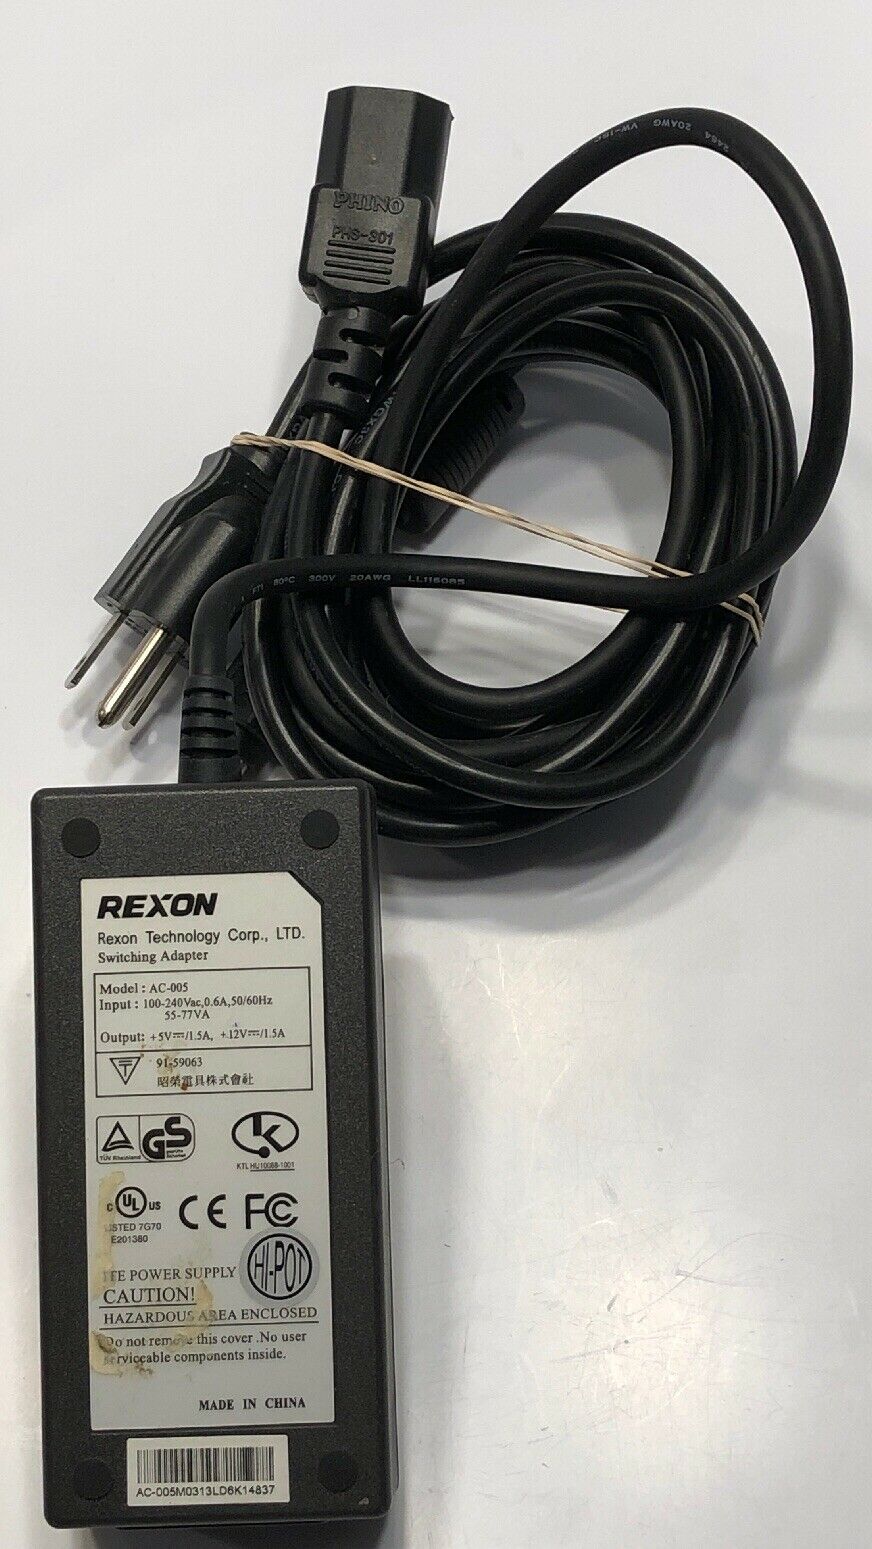 NEW 5V/12V 1.5A REXON AC-005 Switching Ac Adapter